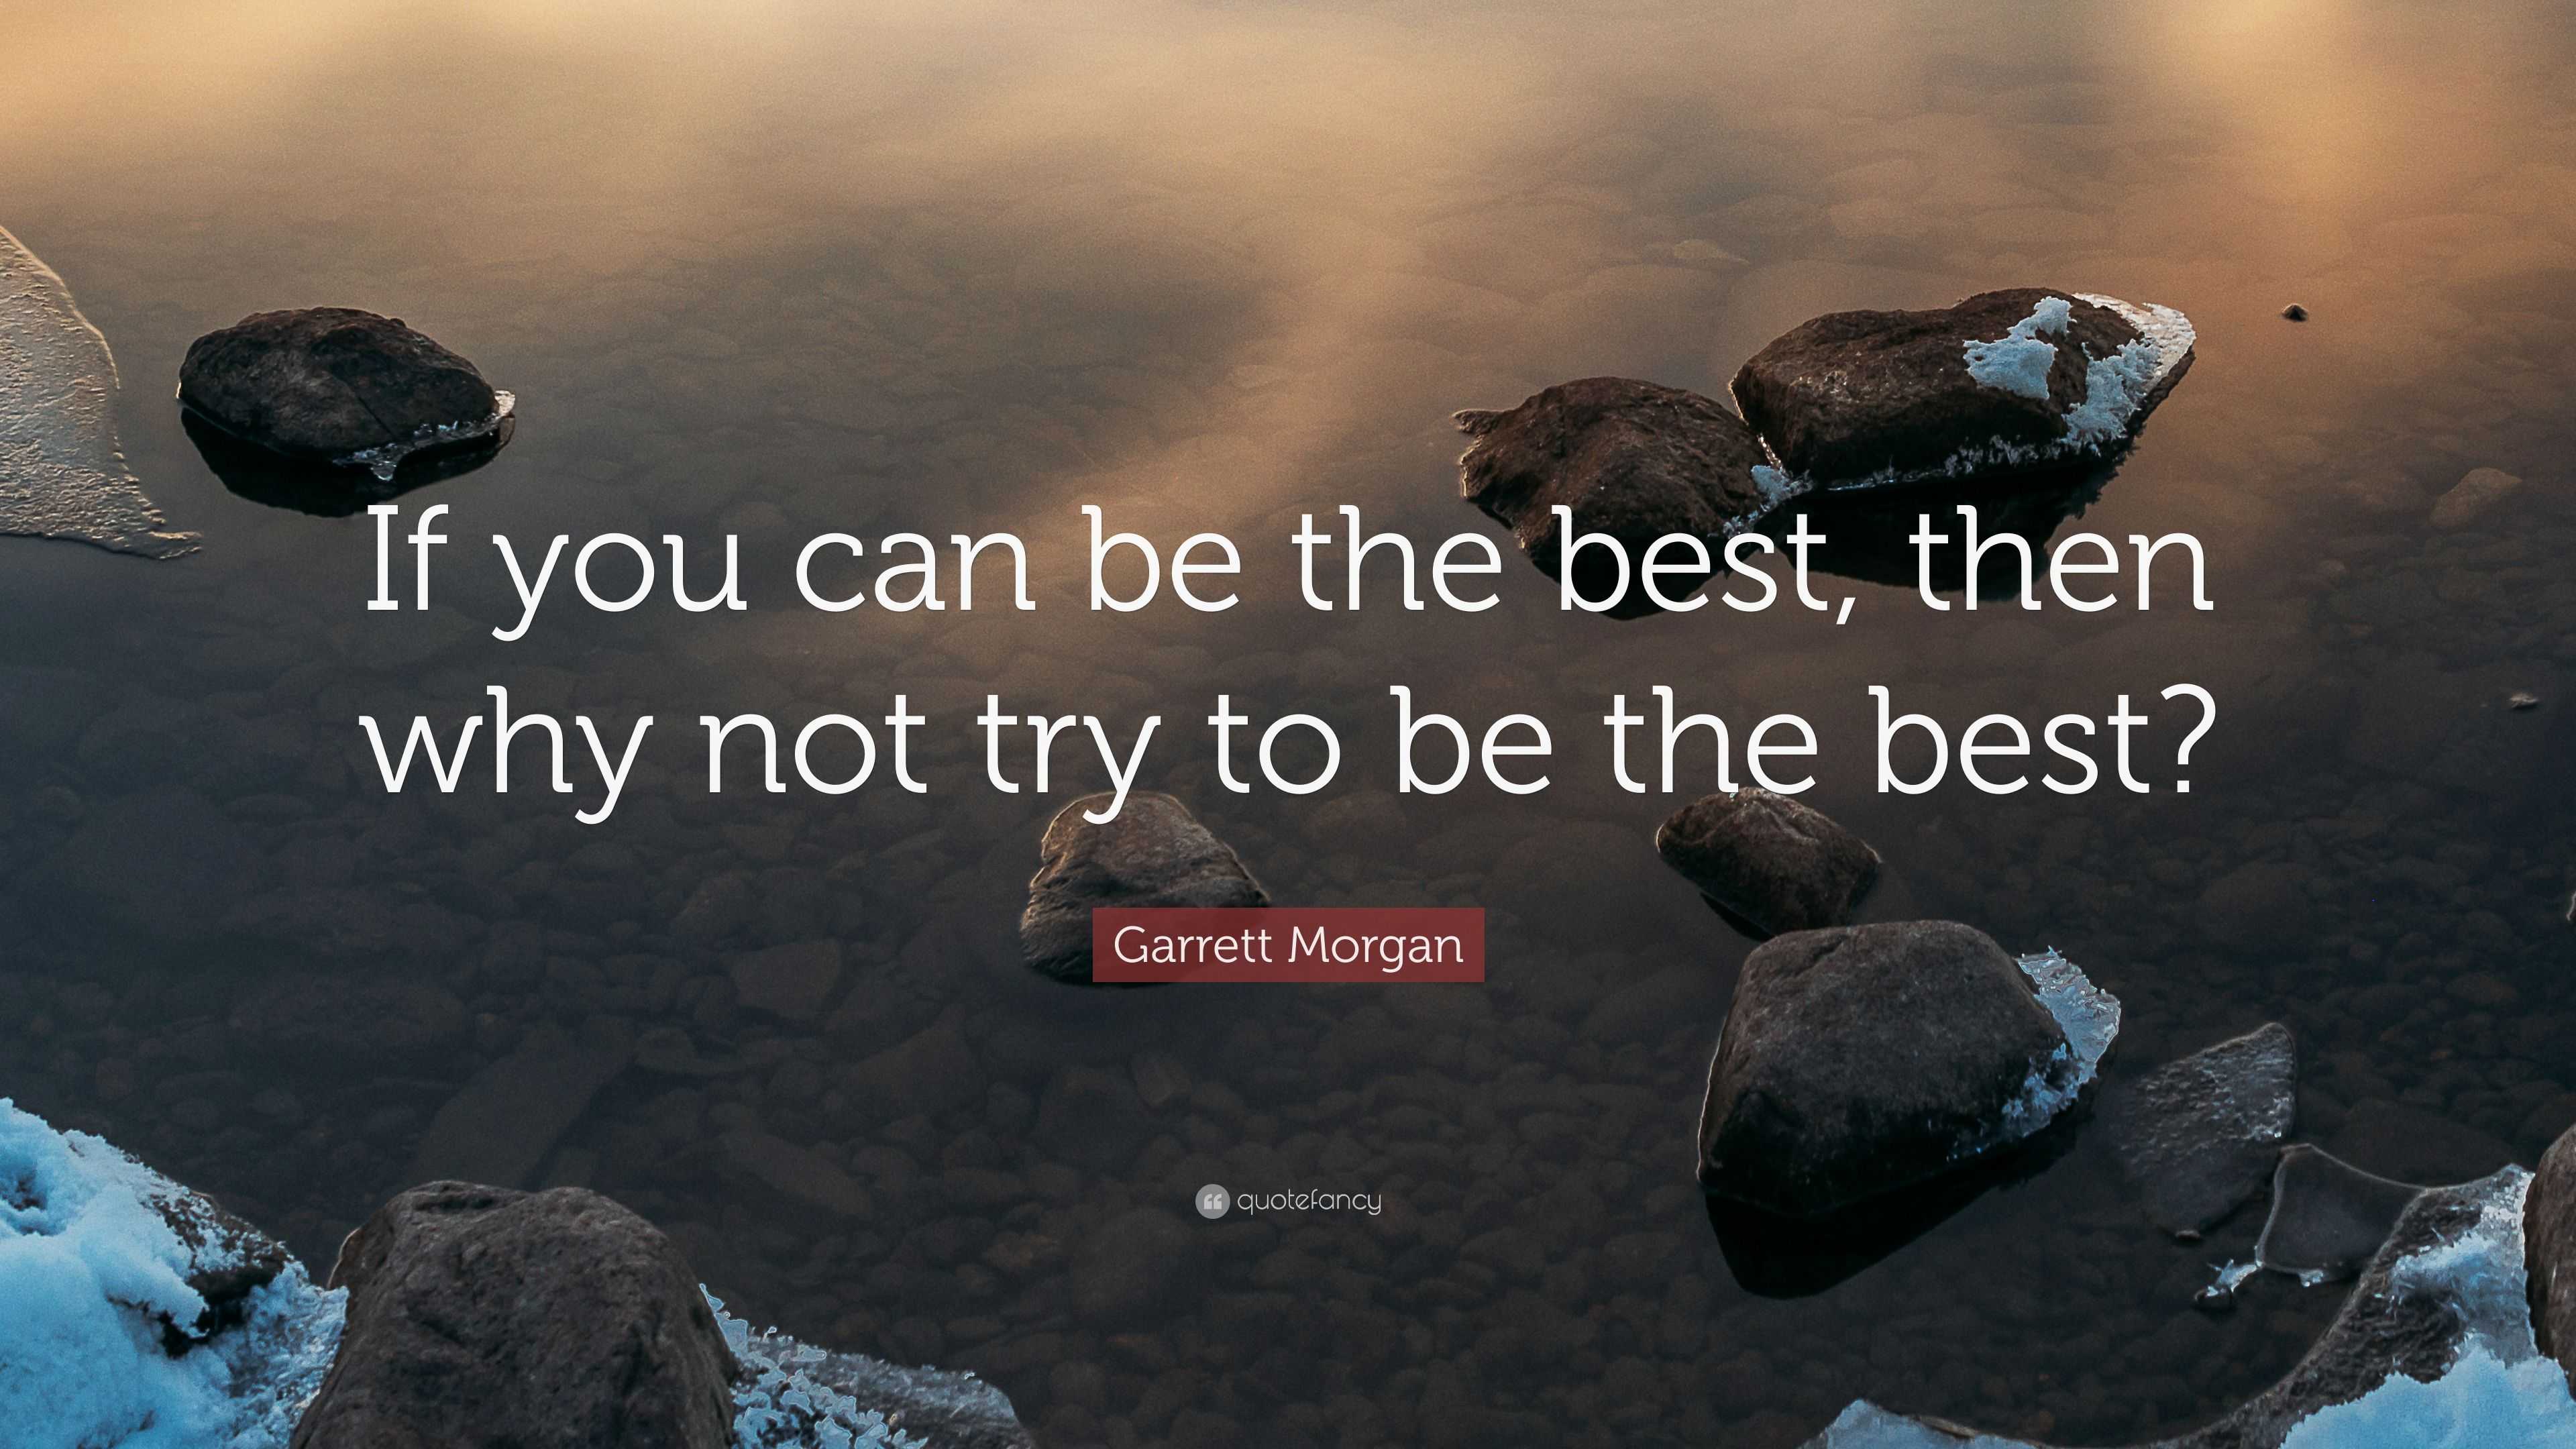 Garrett Morgan Quote: “If you can be the best, then why not try to be